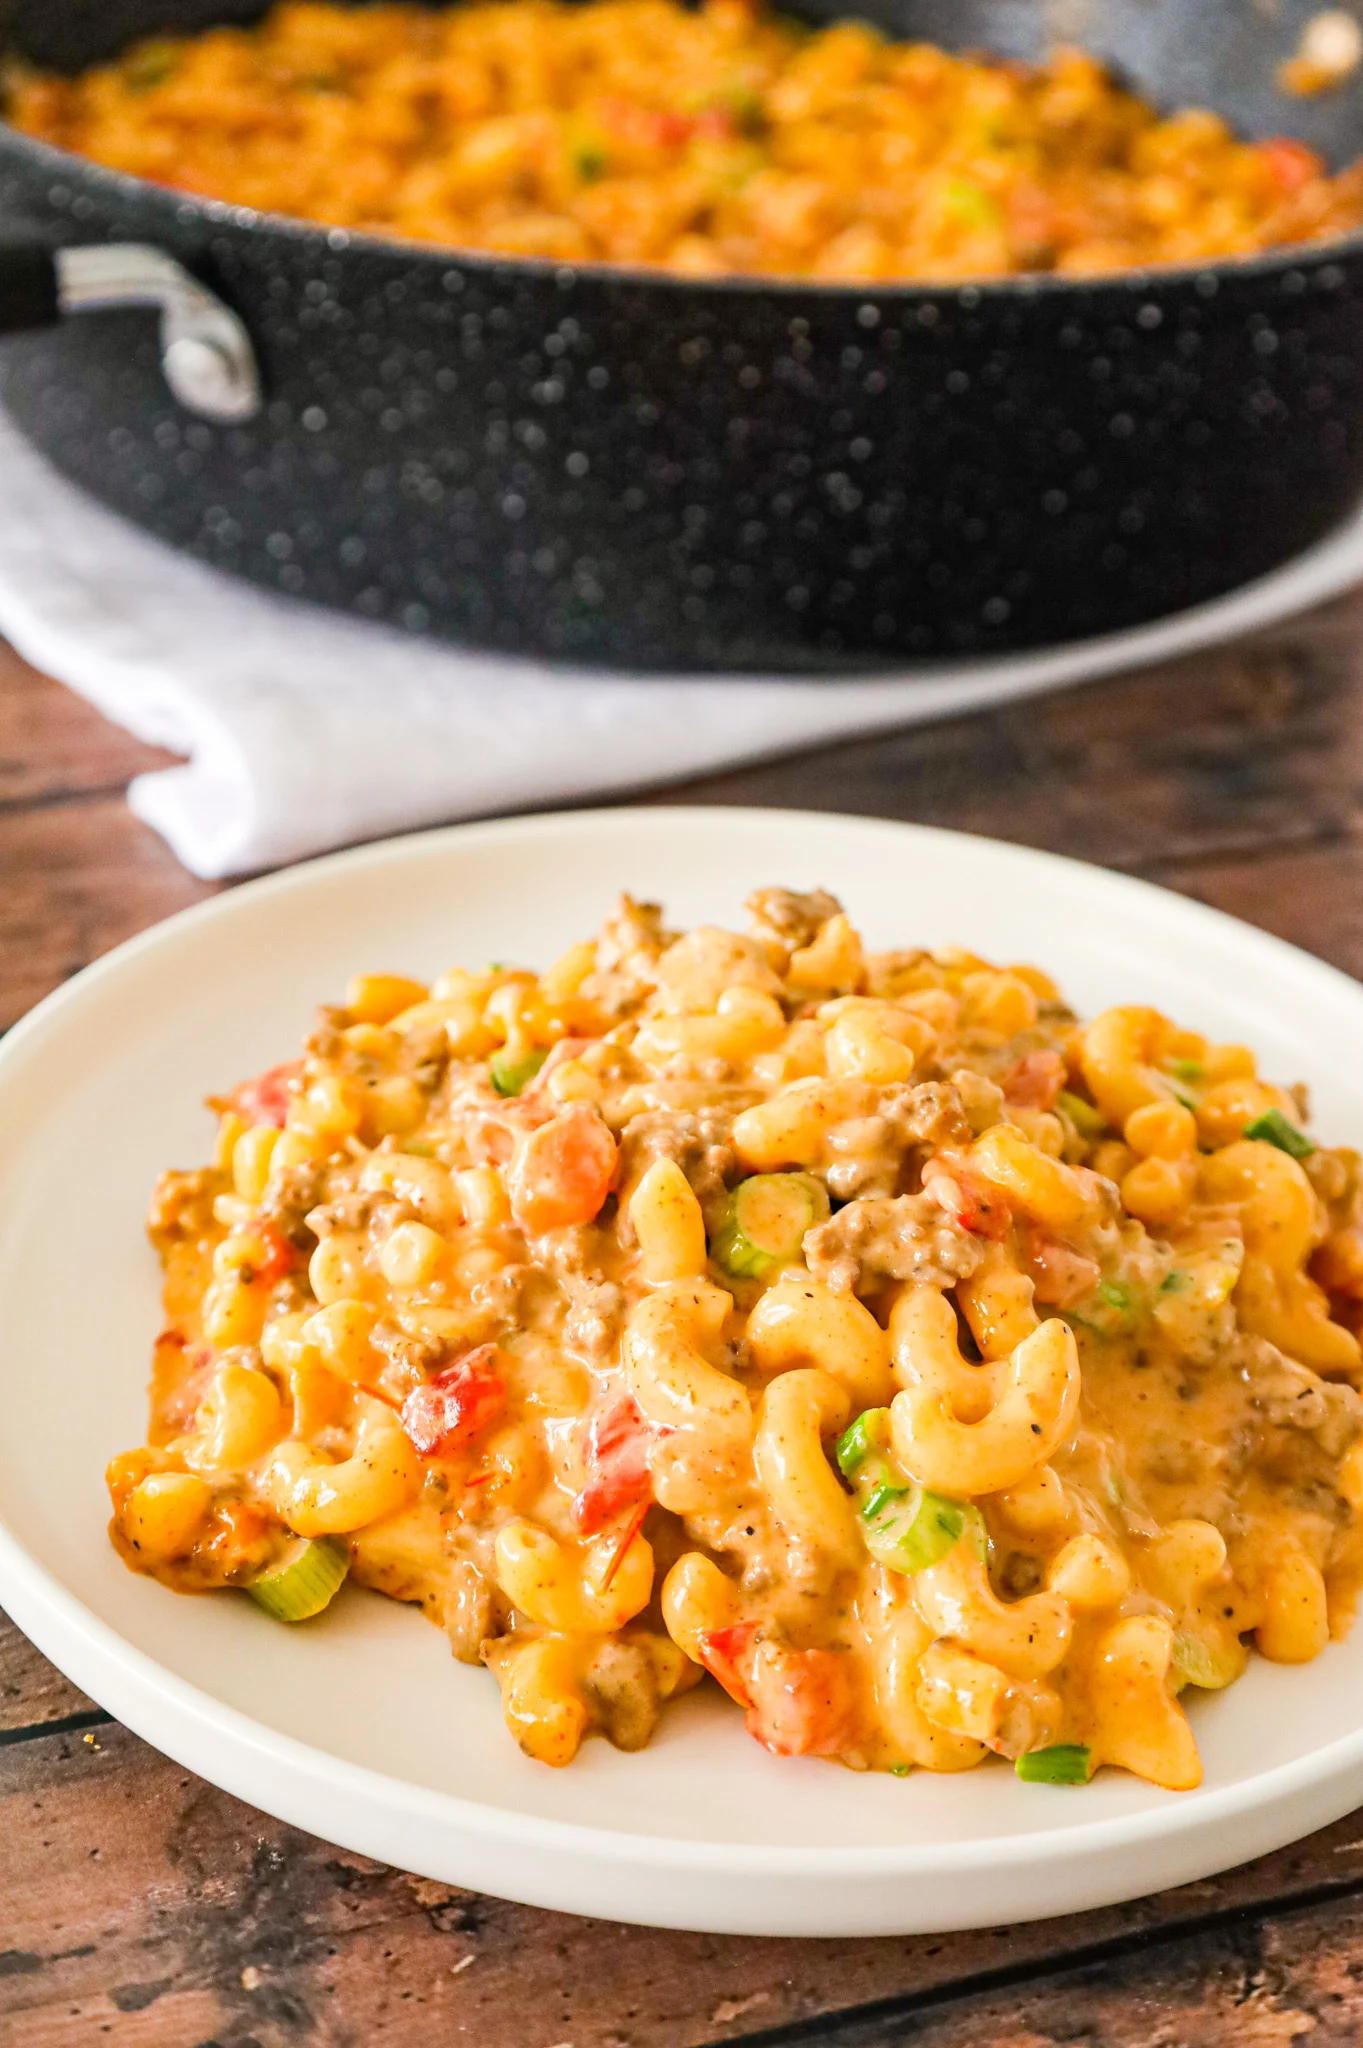 Taco Mac and Cheese is an easy pasta recipe loaded with ground beef, taco seasoning and Rotel diced tomatoes and tossed in a creamy cheese sauce.